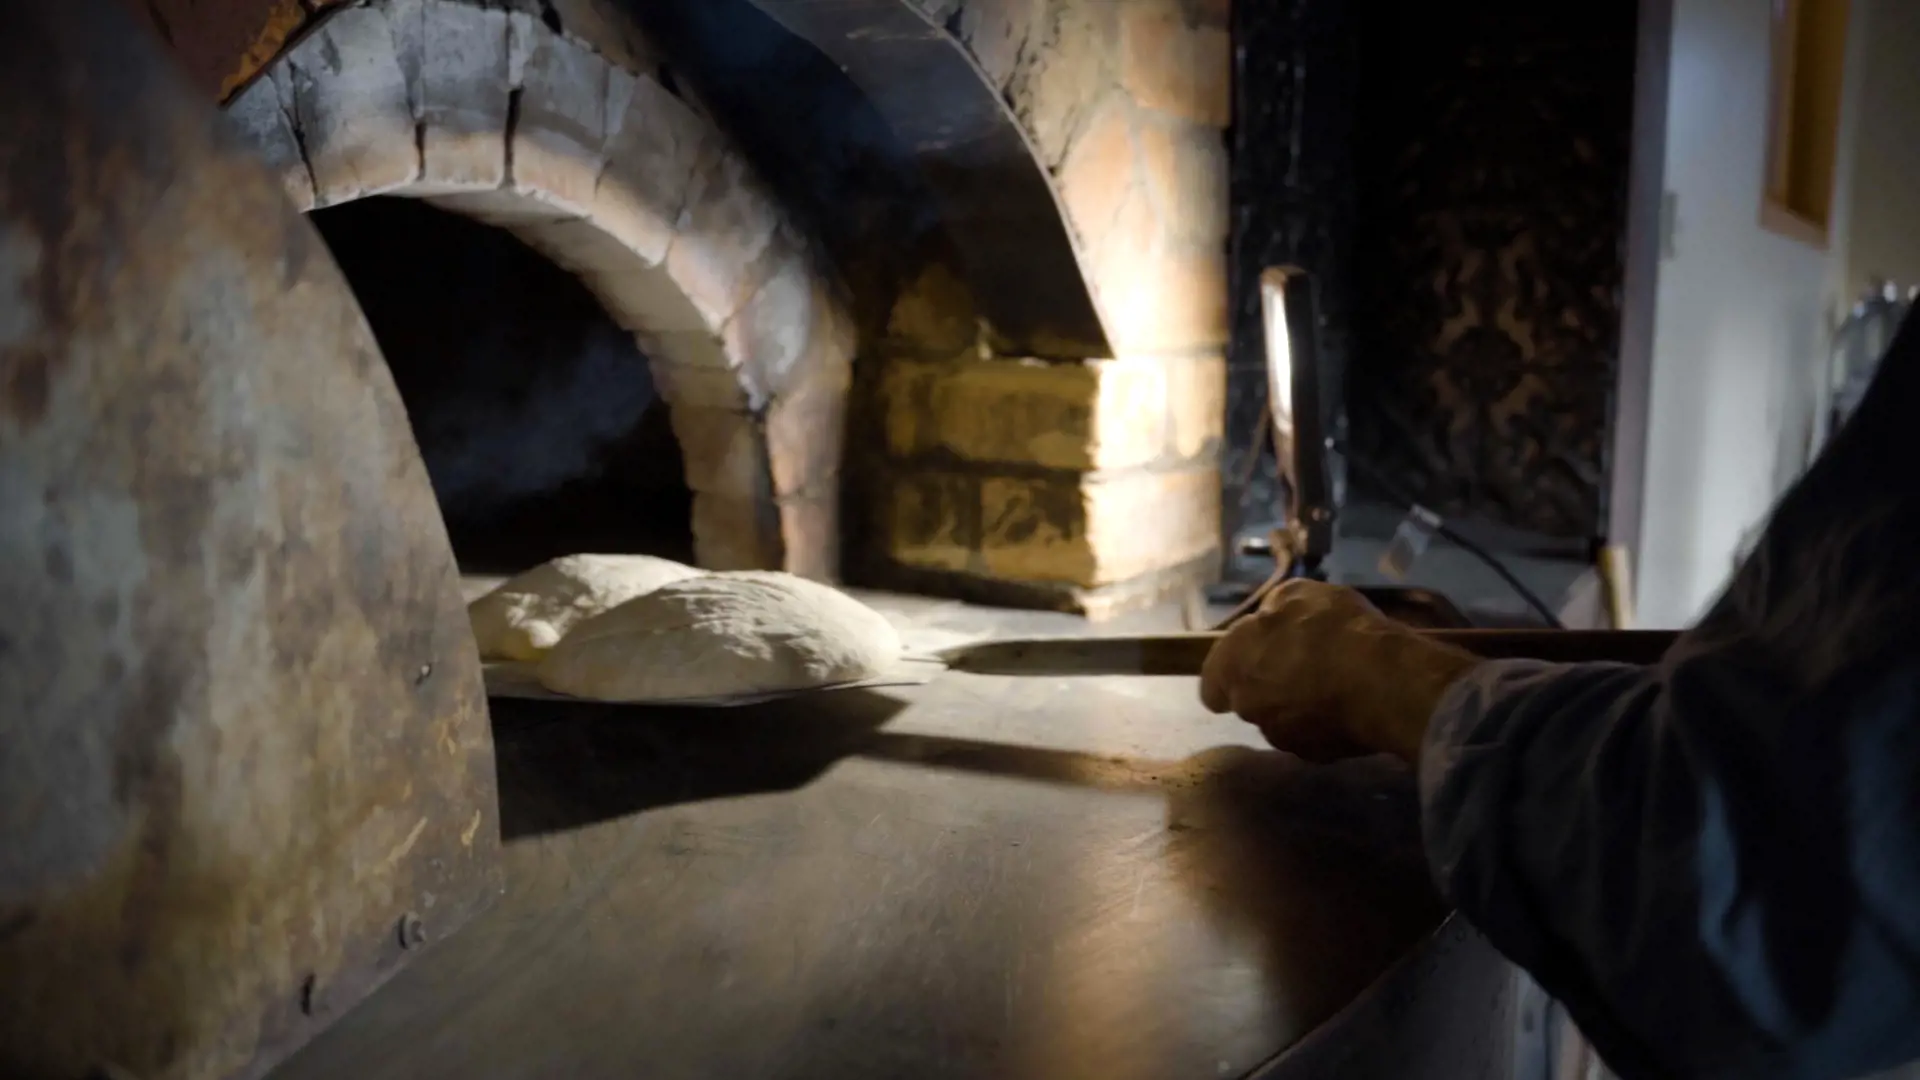 A man carefully places bread dough into the arched opening of a large brick wood-fired oven.